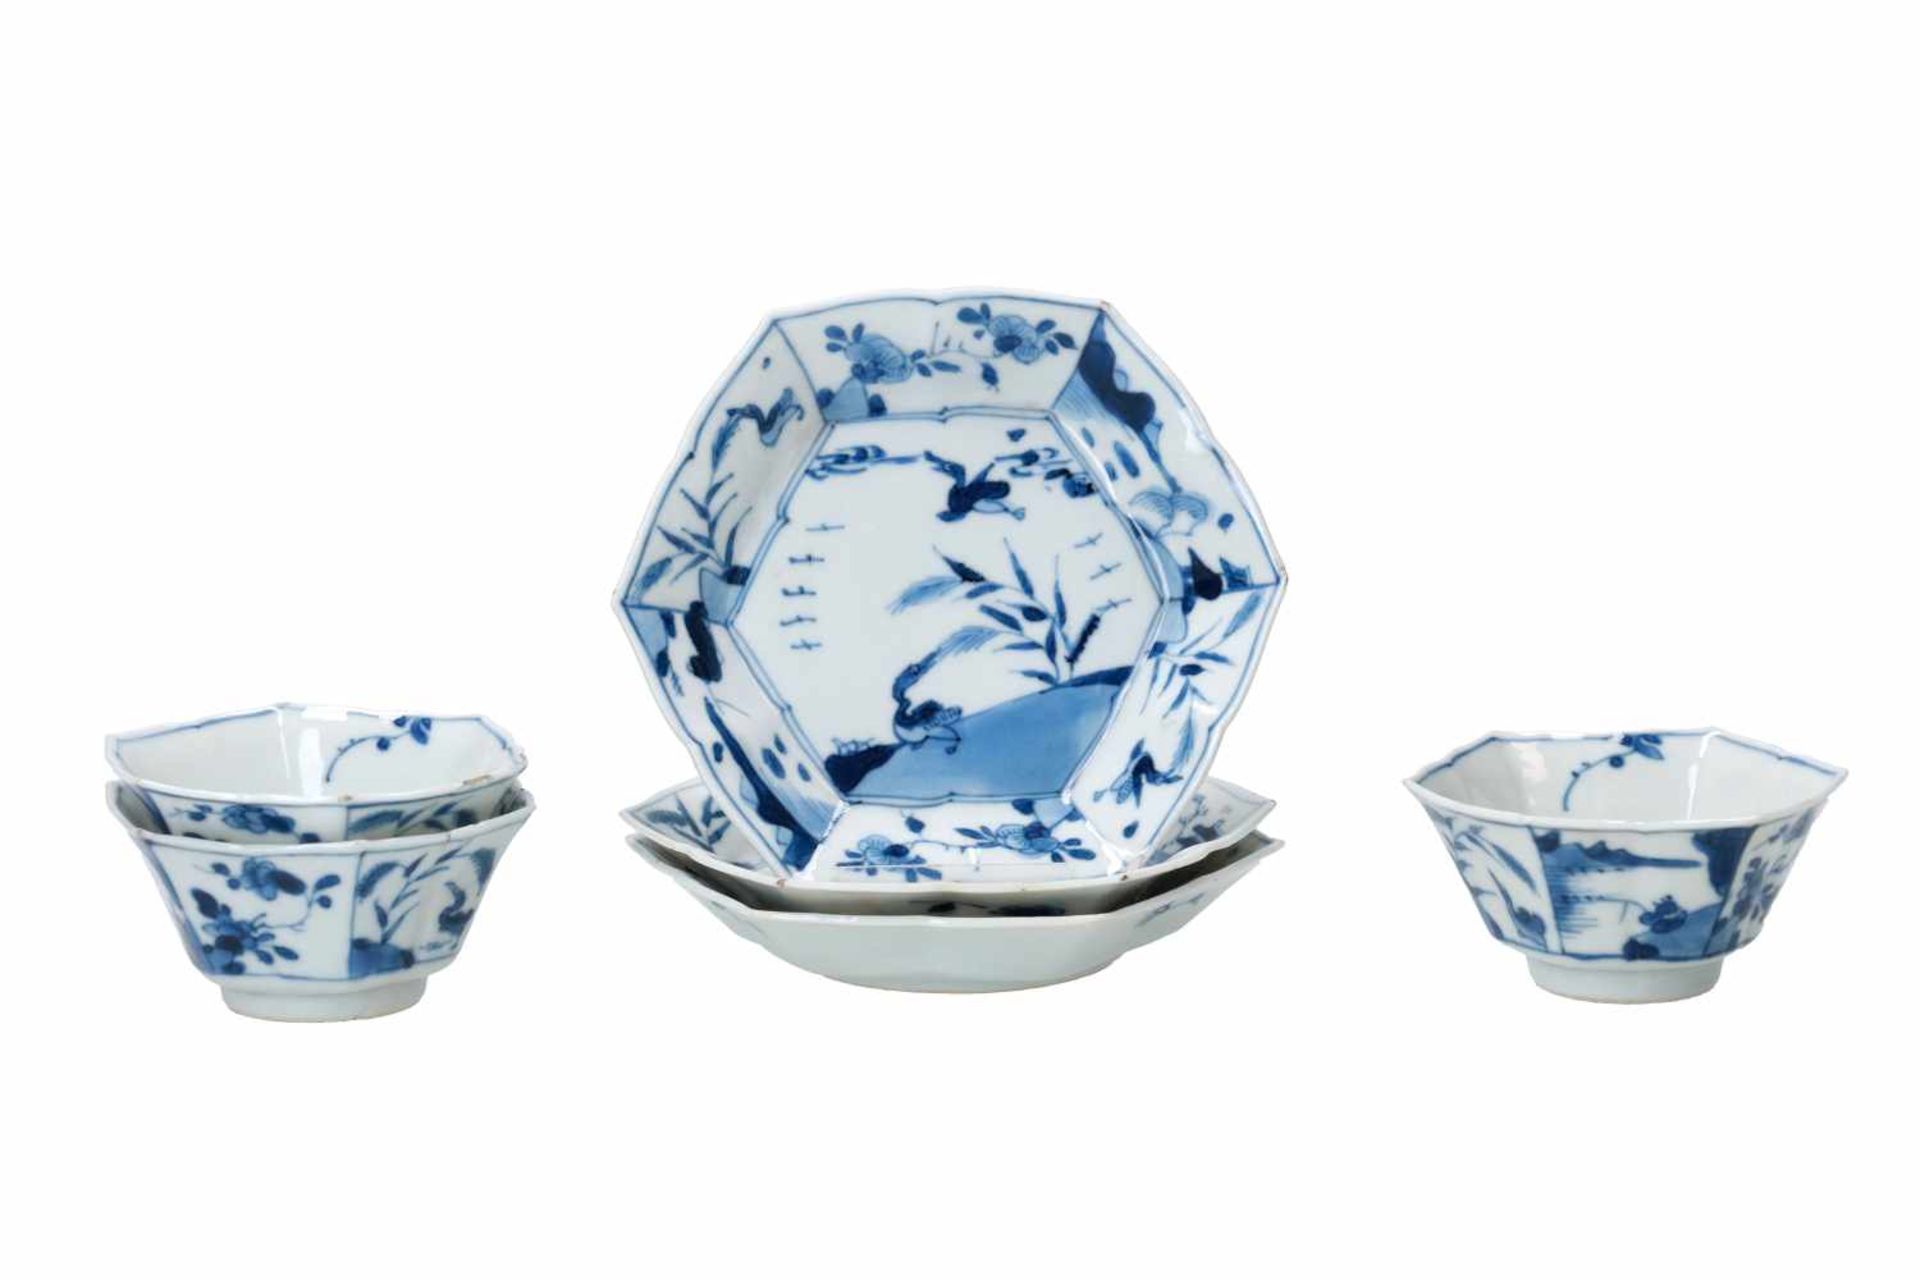 A set of three hexagonal blue and white porcelain cups with saucers, decorated with ducks, flowers